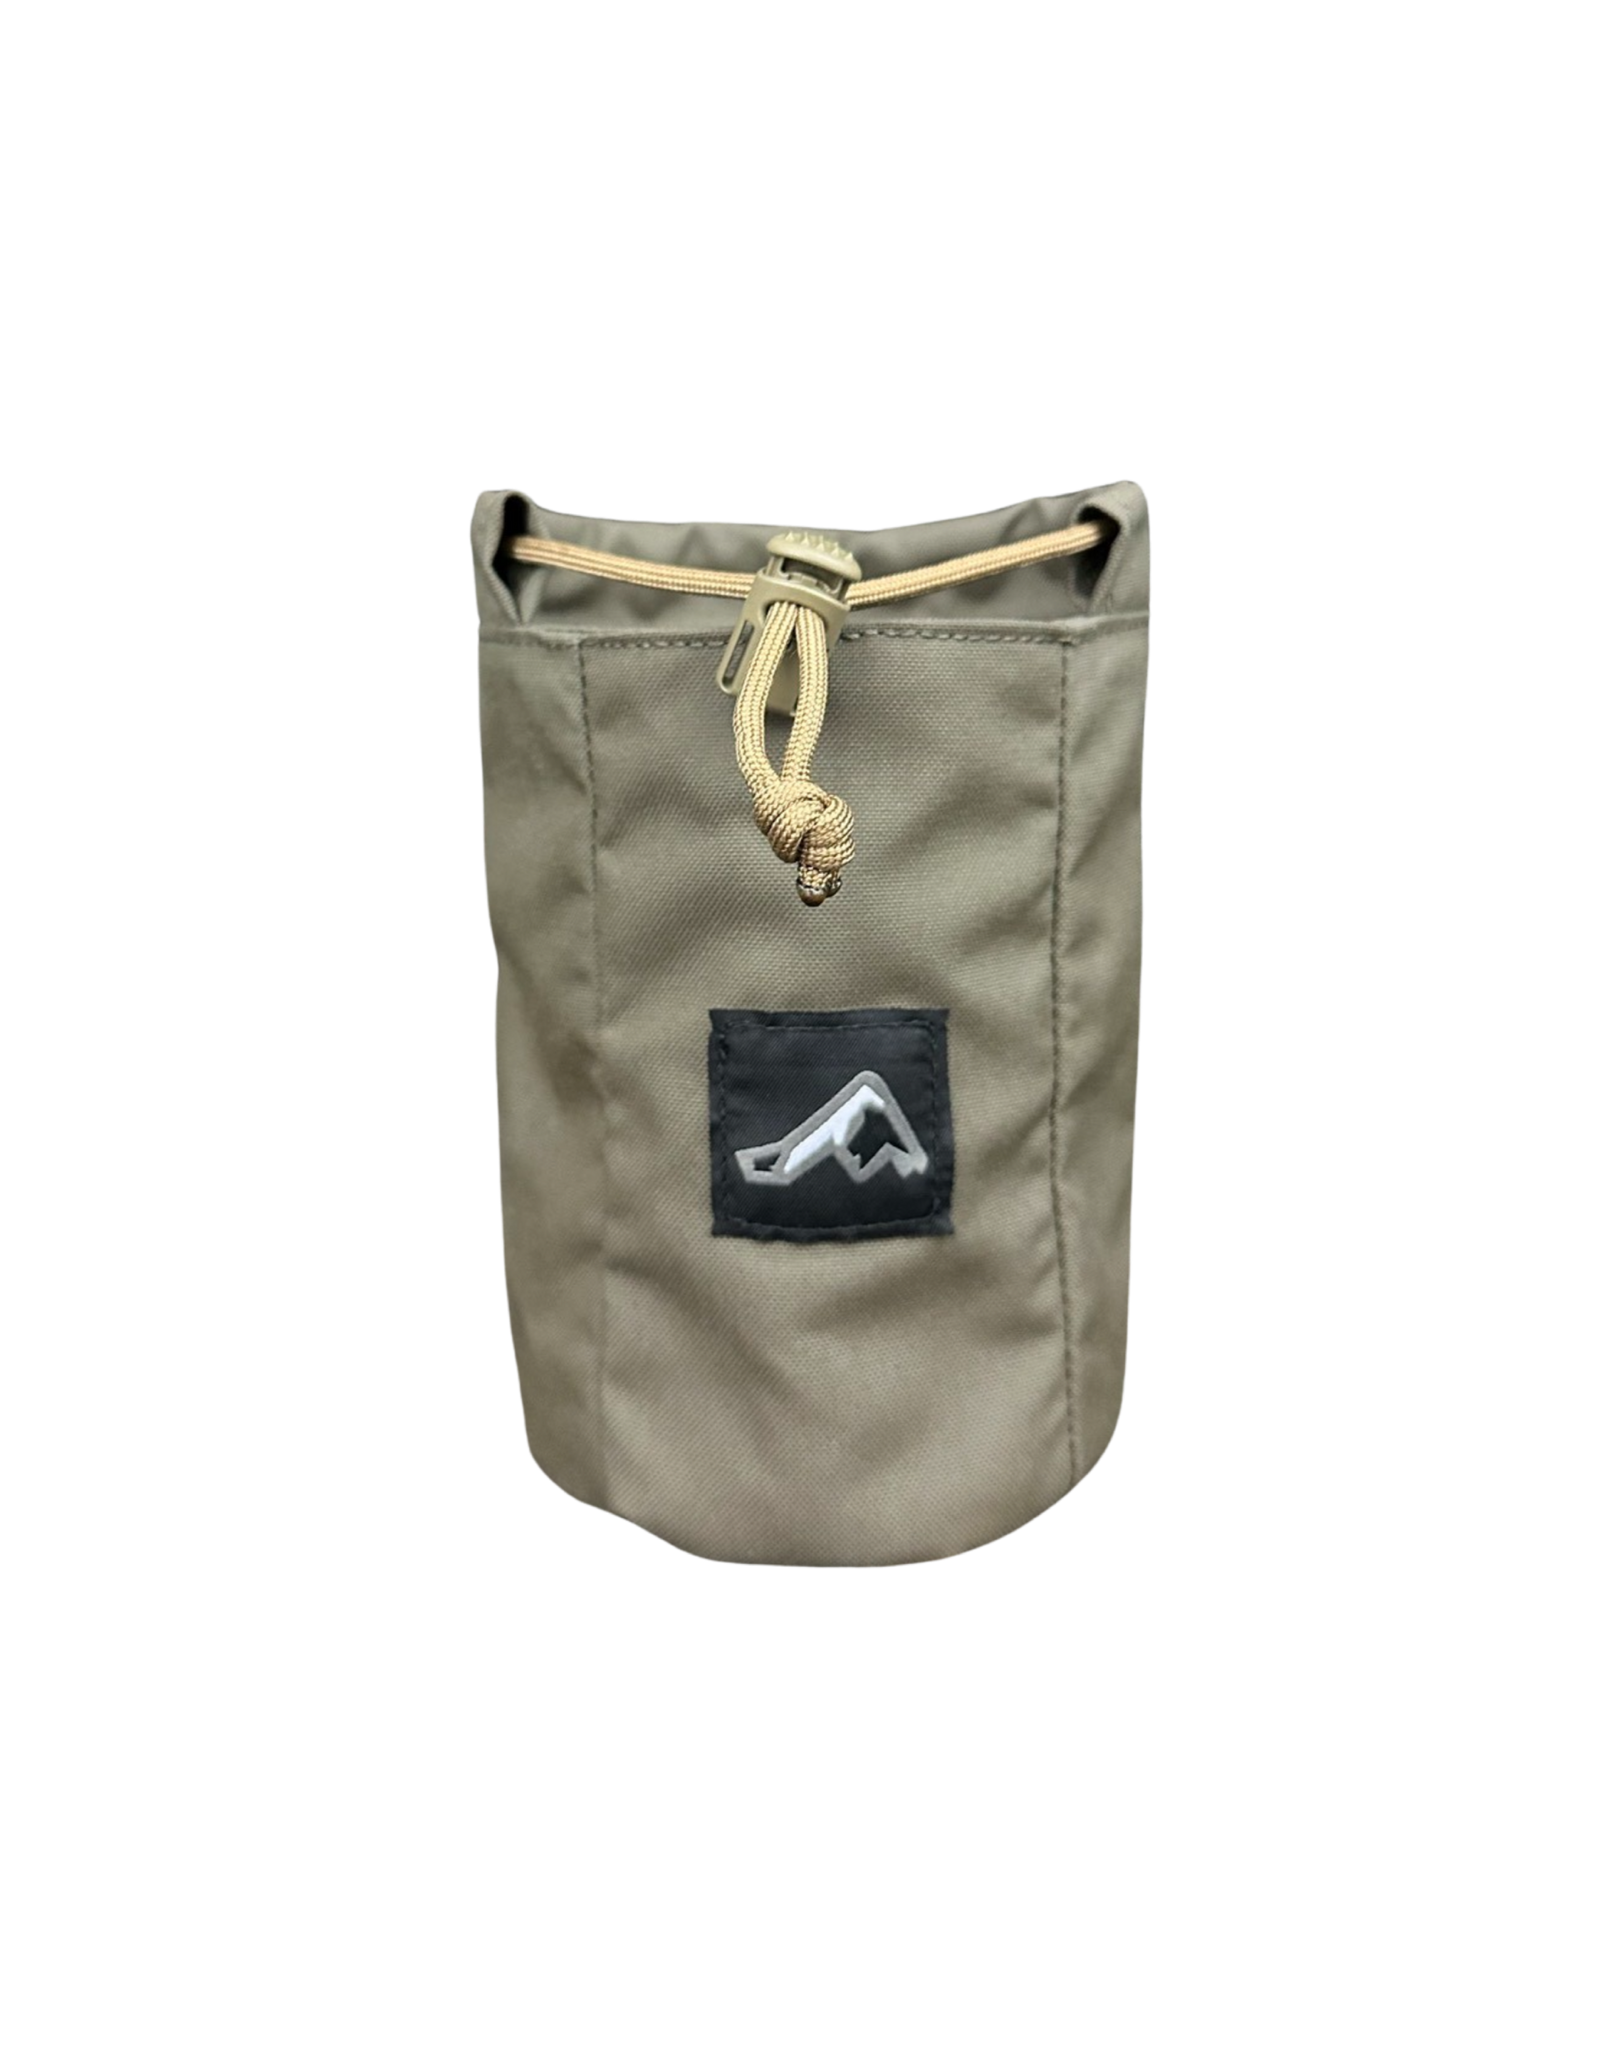 Highly reccomend a MOLLE water bottle pouch for the Backpack. : r